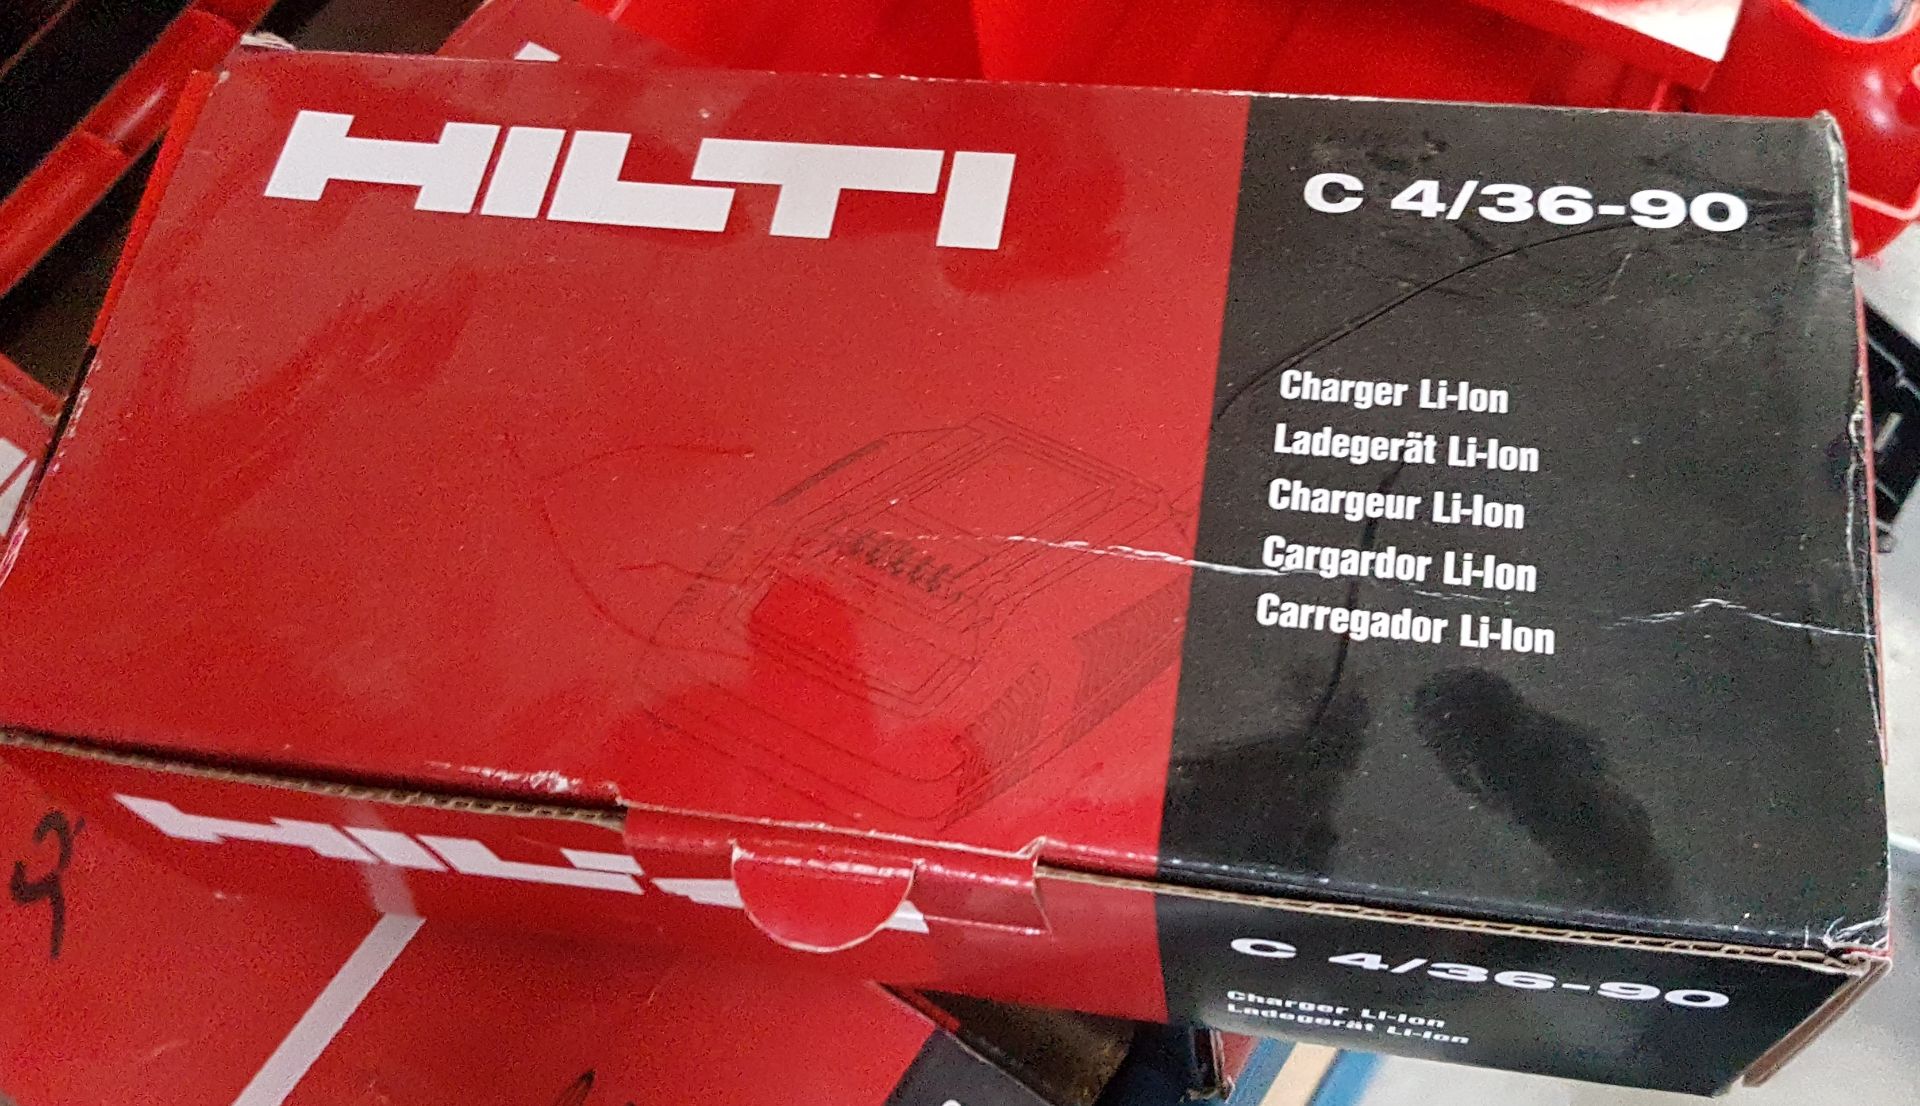 2 x Hilti C 4/36-90 Li-On Chargers - 110v - With Original Boxes - Image 2 of 3